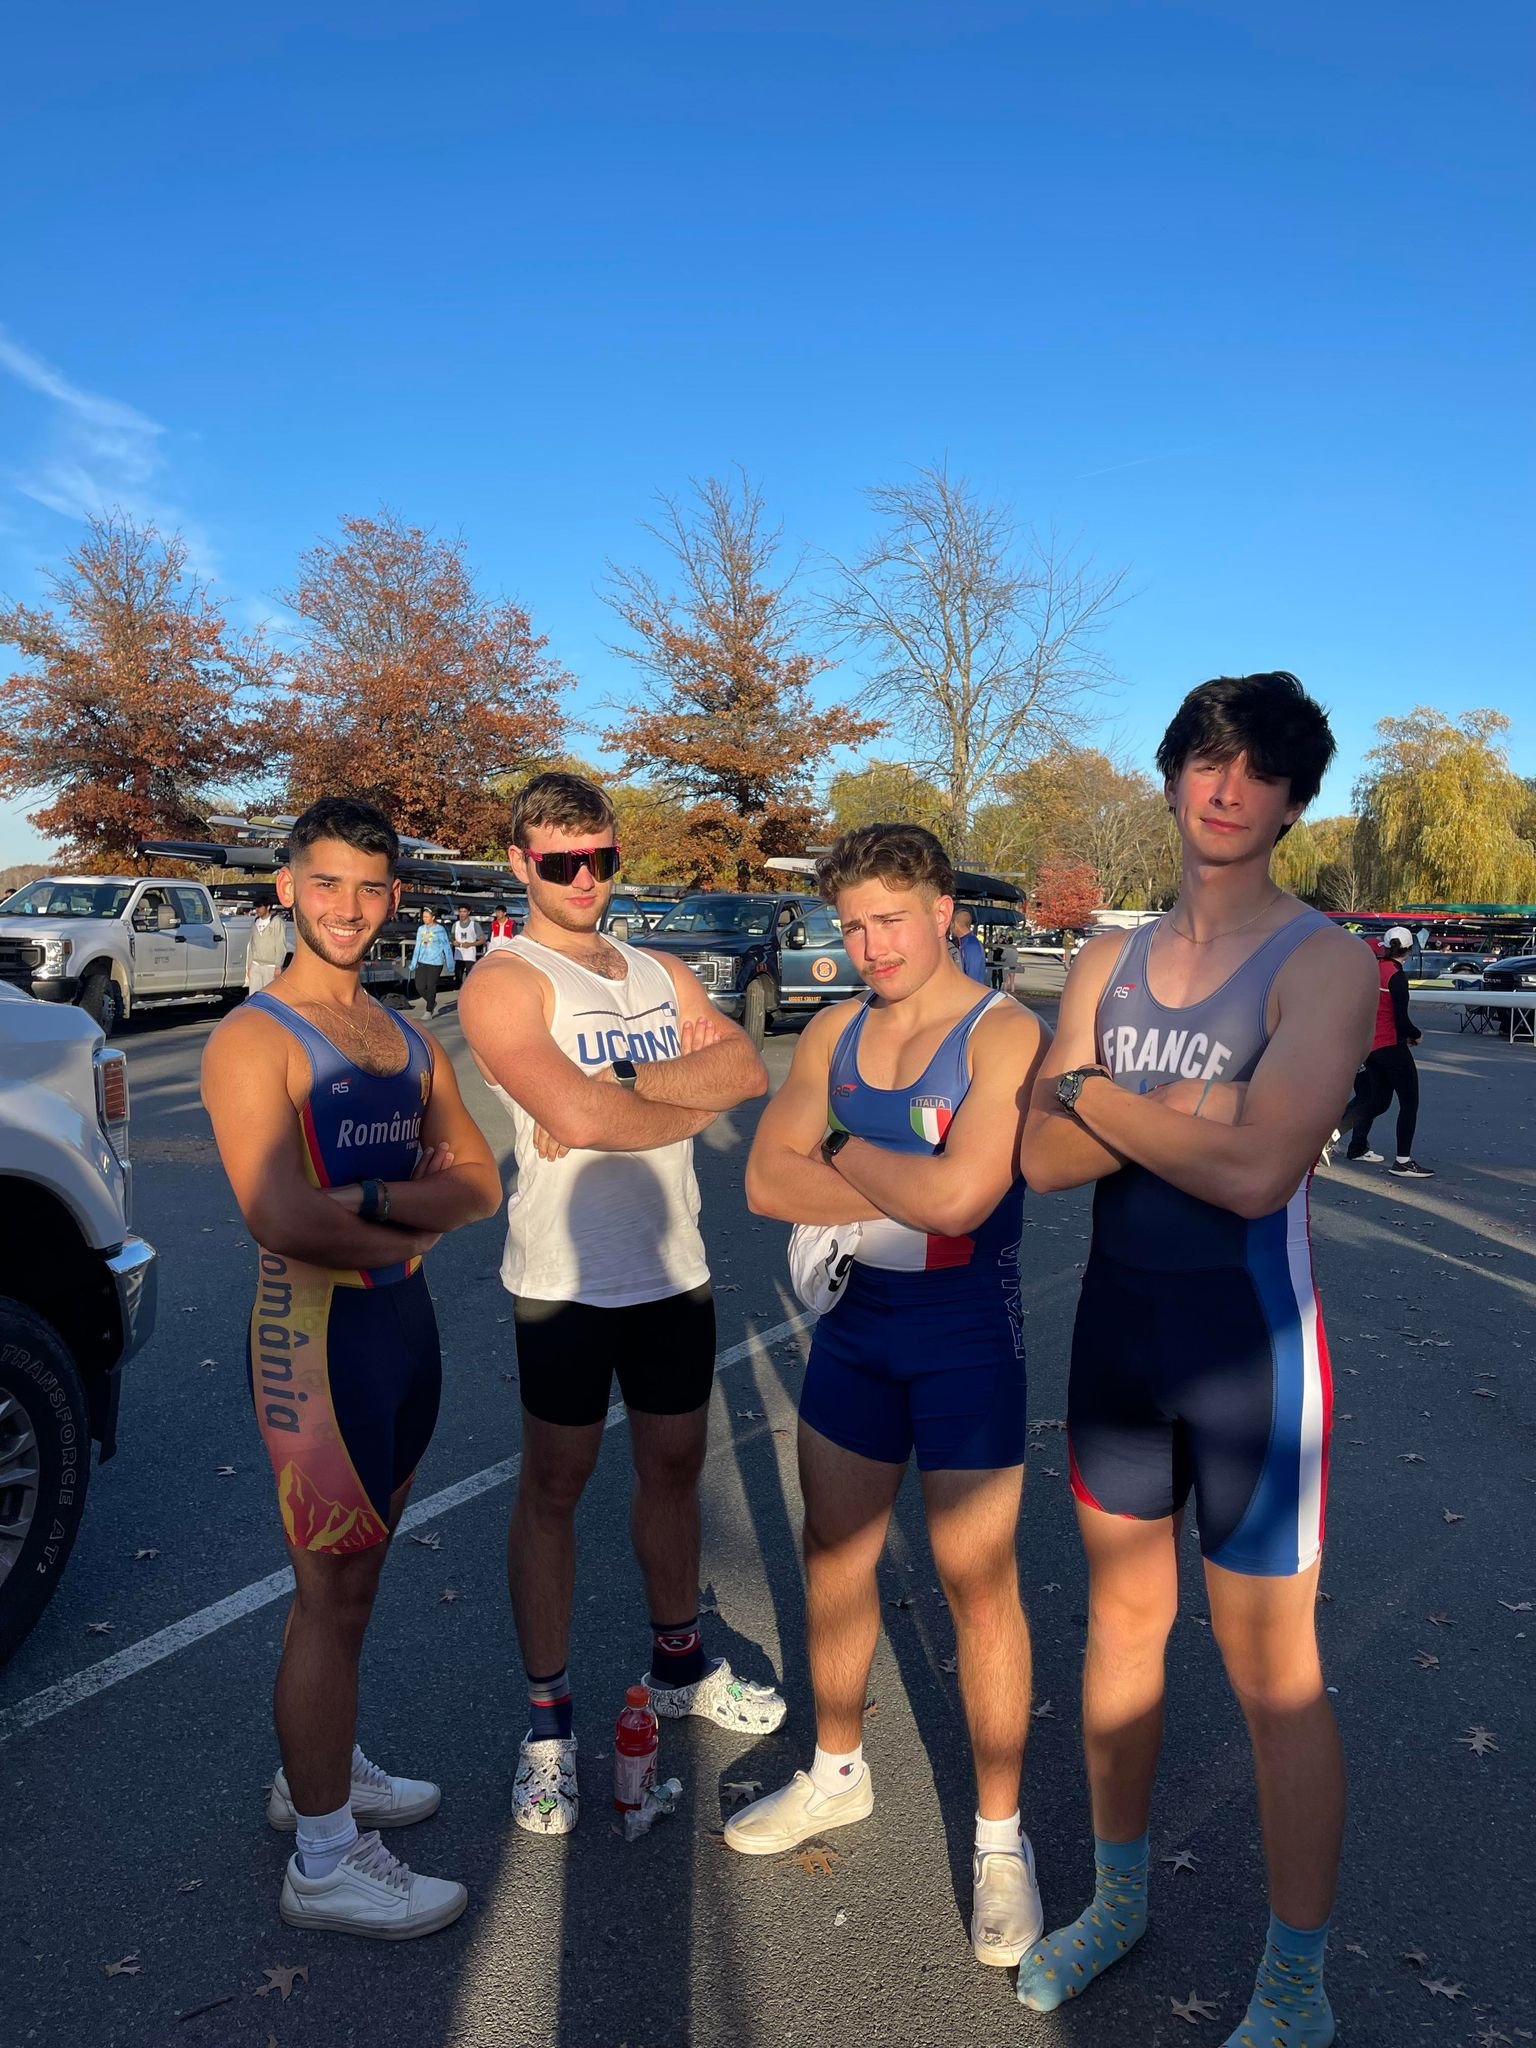 The Novice 4+ showing off their unis